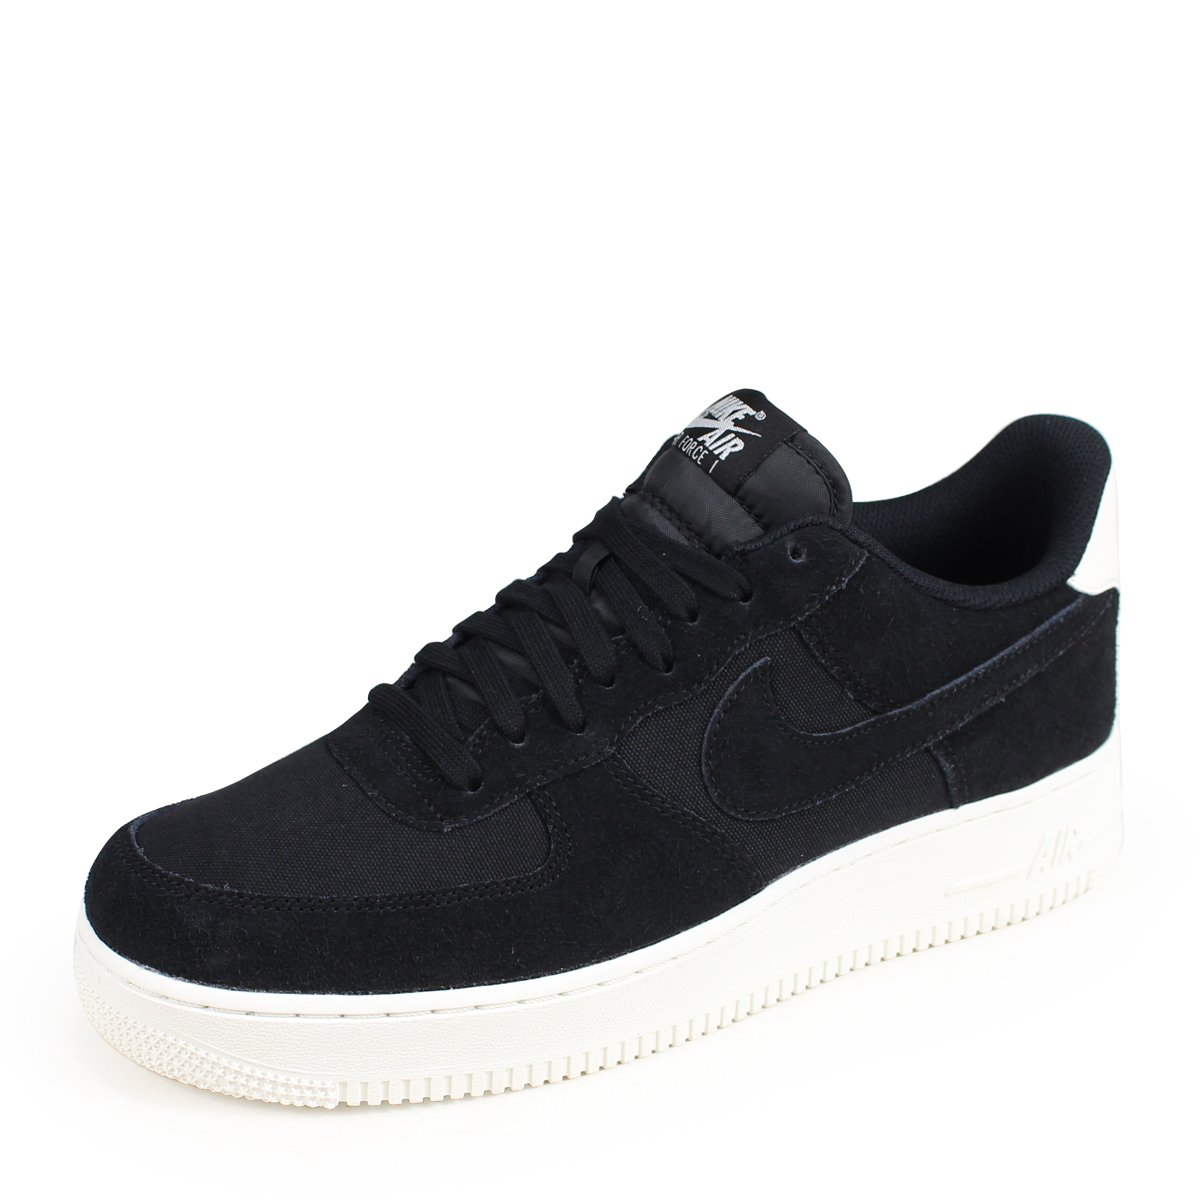 nike air force 1 black white suede